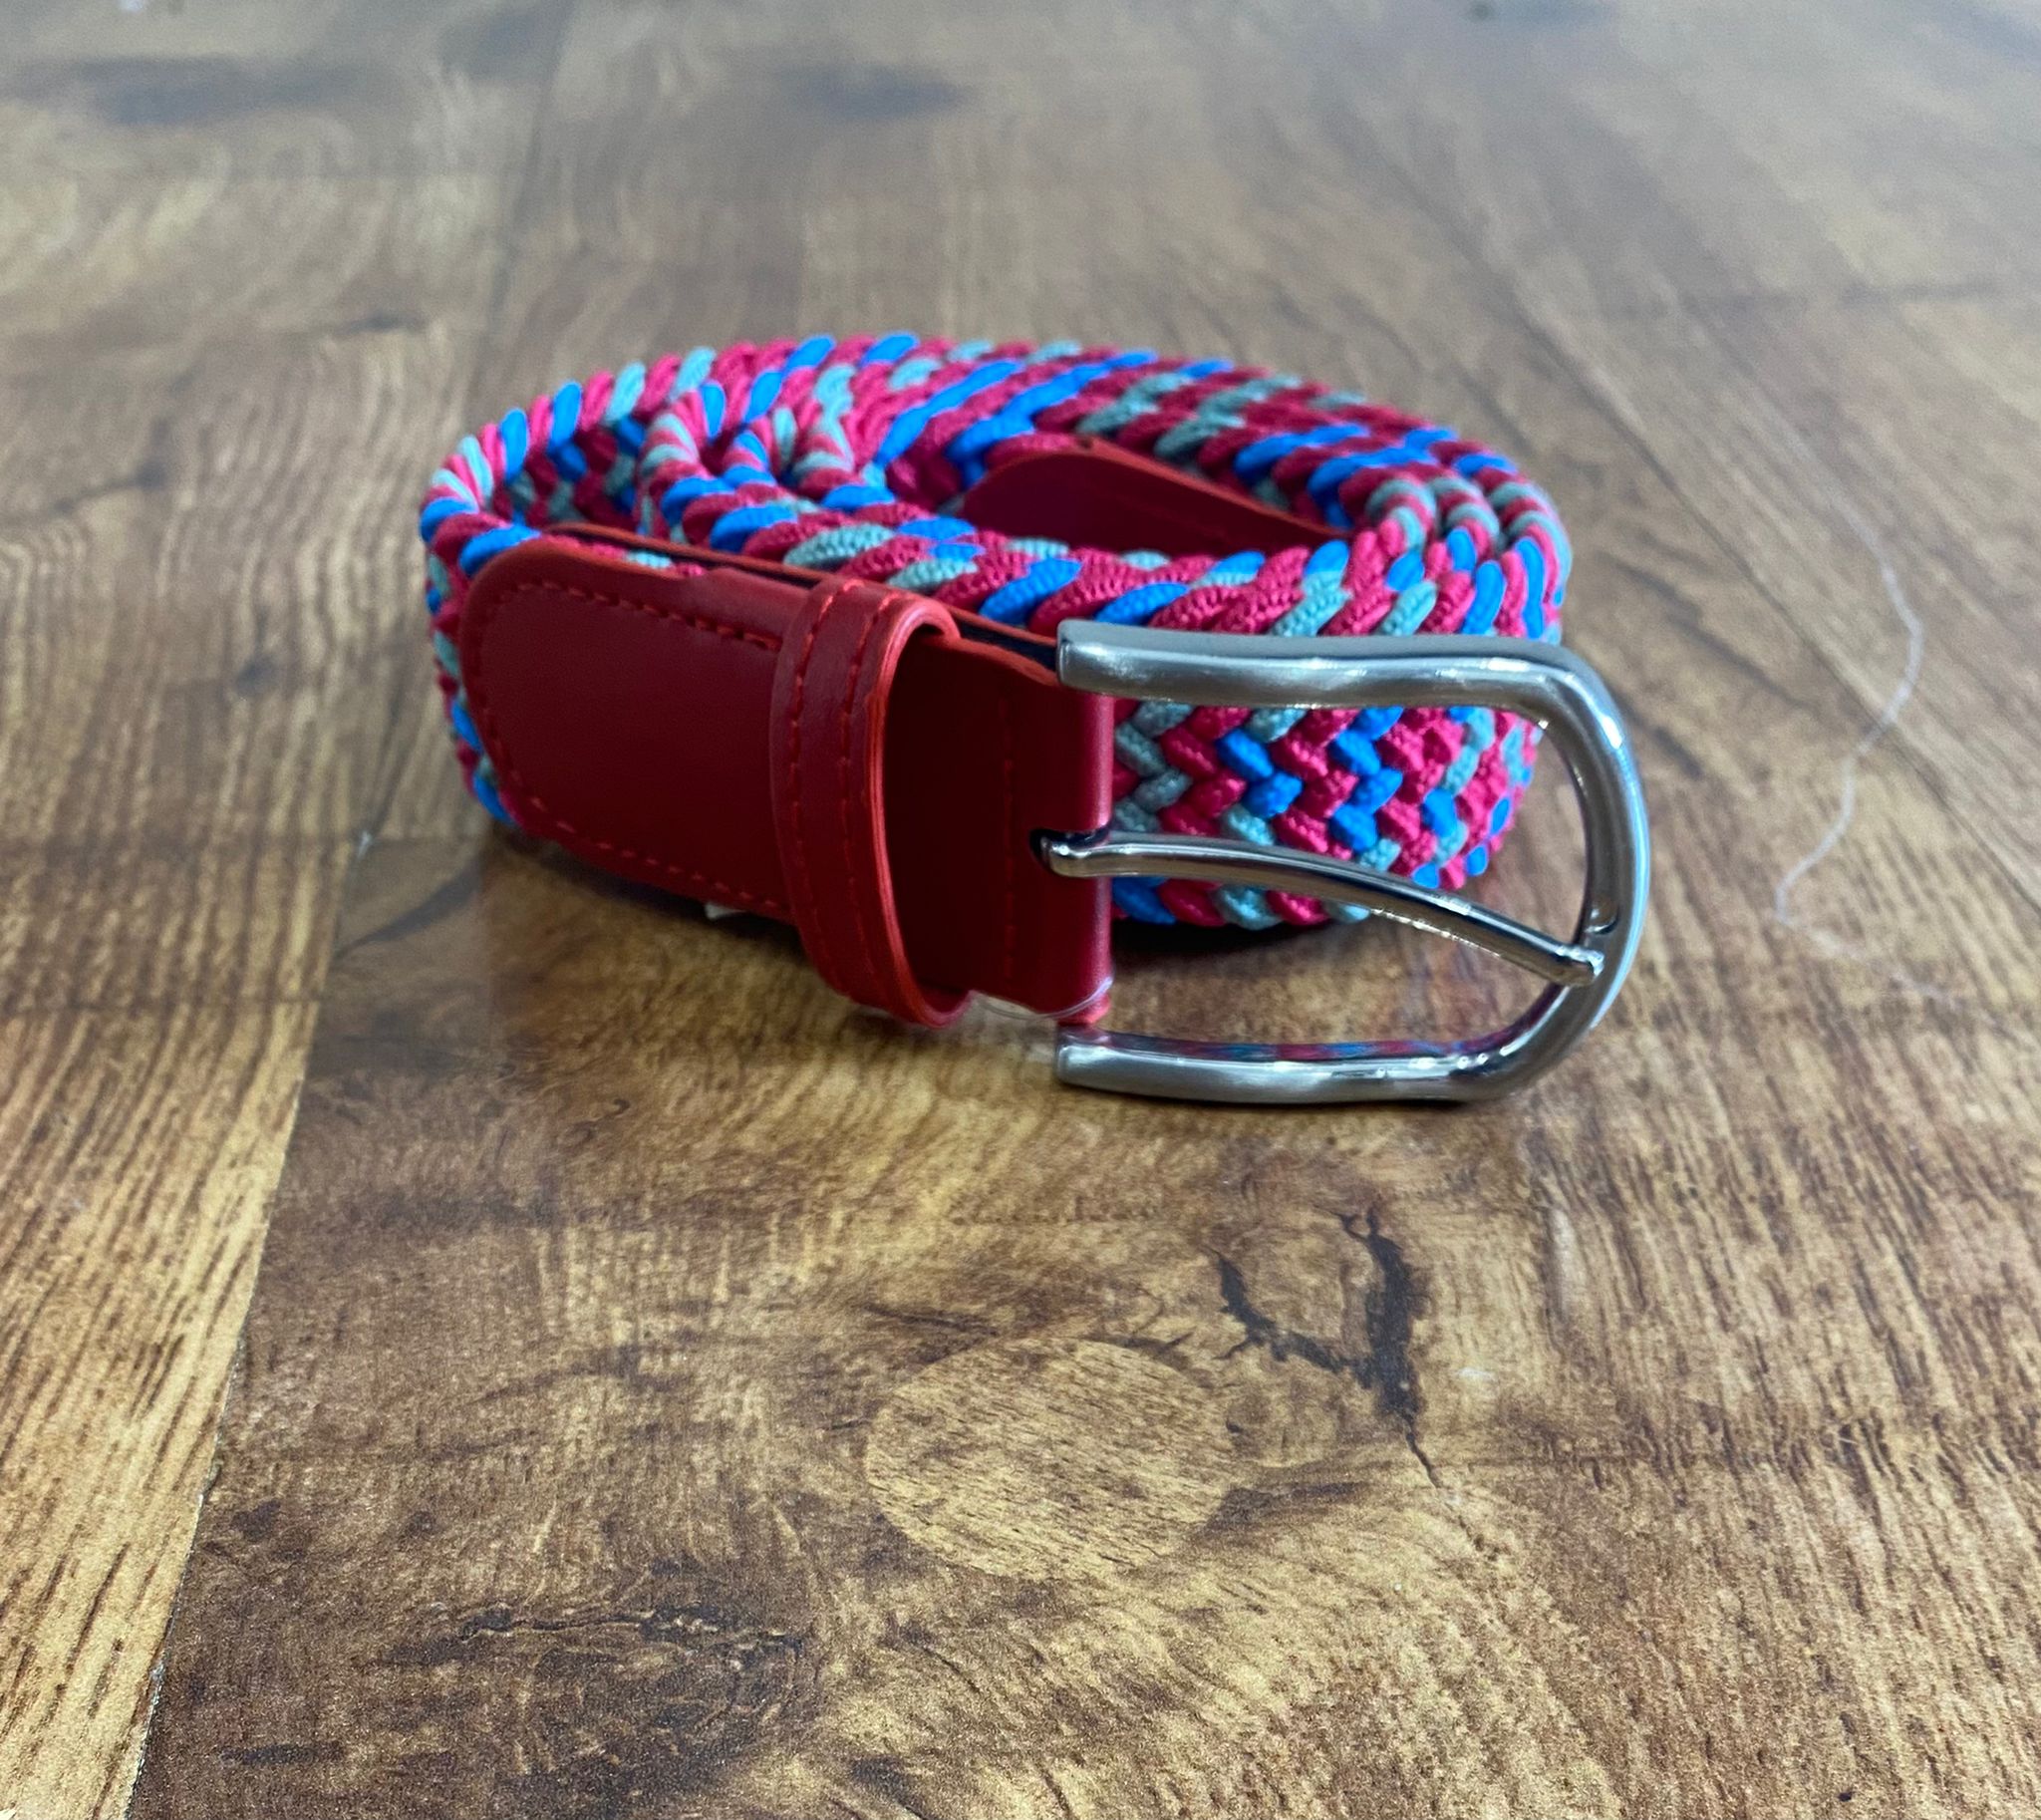 RED MIX WOVEN BELT FROM OXFORD LEATHER CRAFT